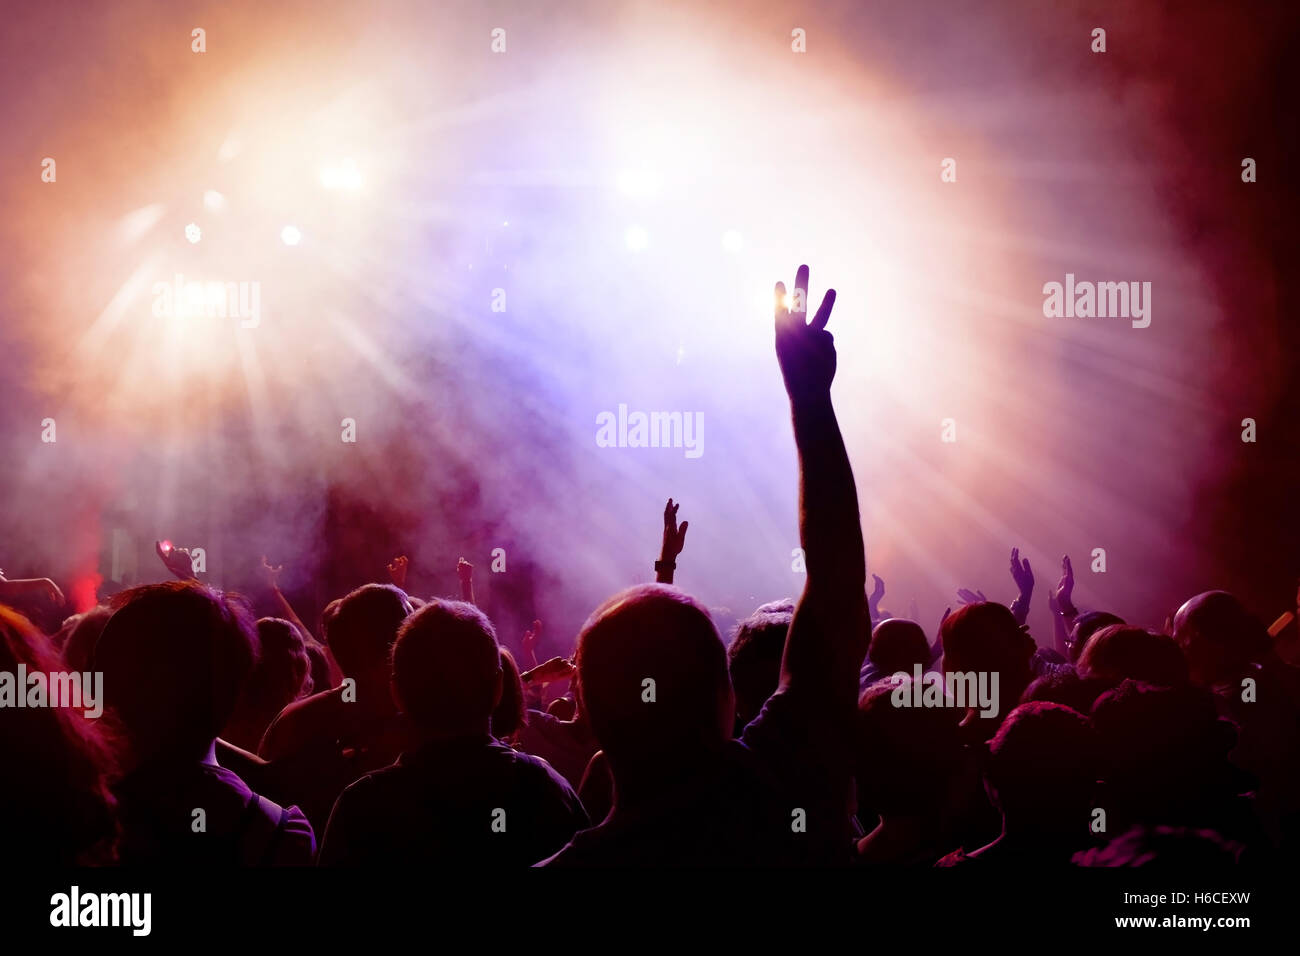 Dancing Crowd of young people dancing at disco. People Raising hands against purple and pink smoky background with light beams. Stock Photo